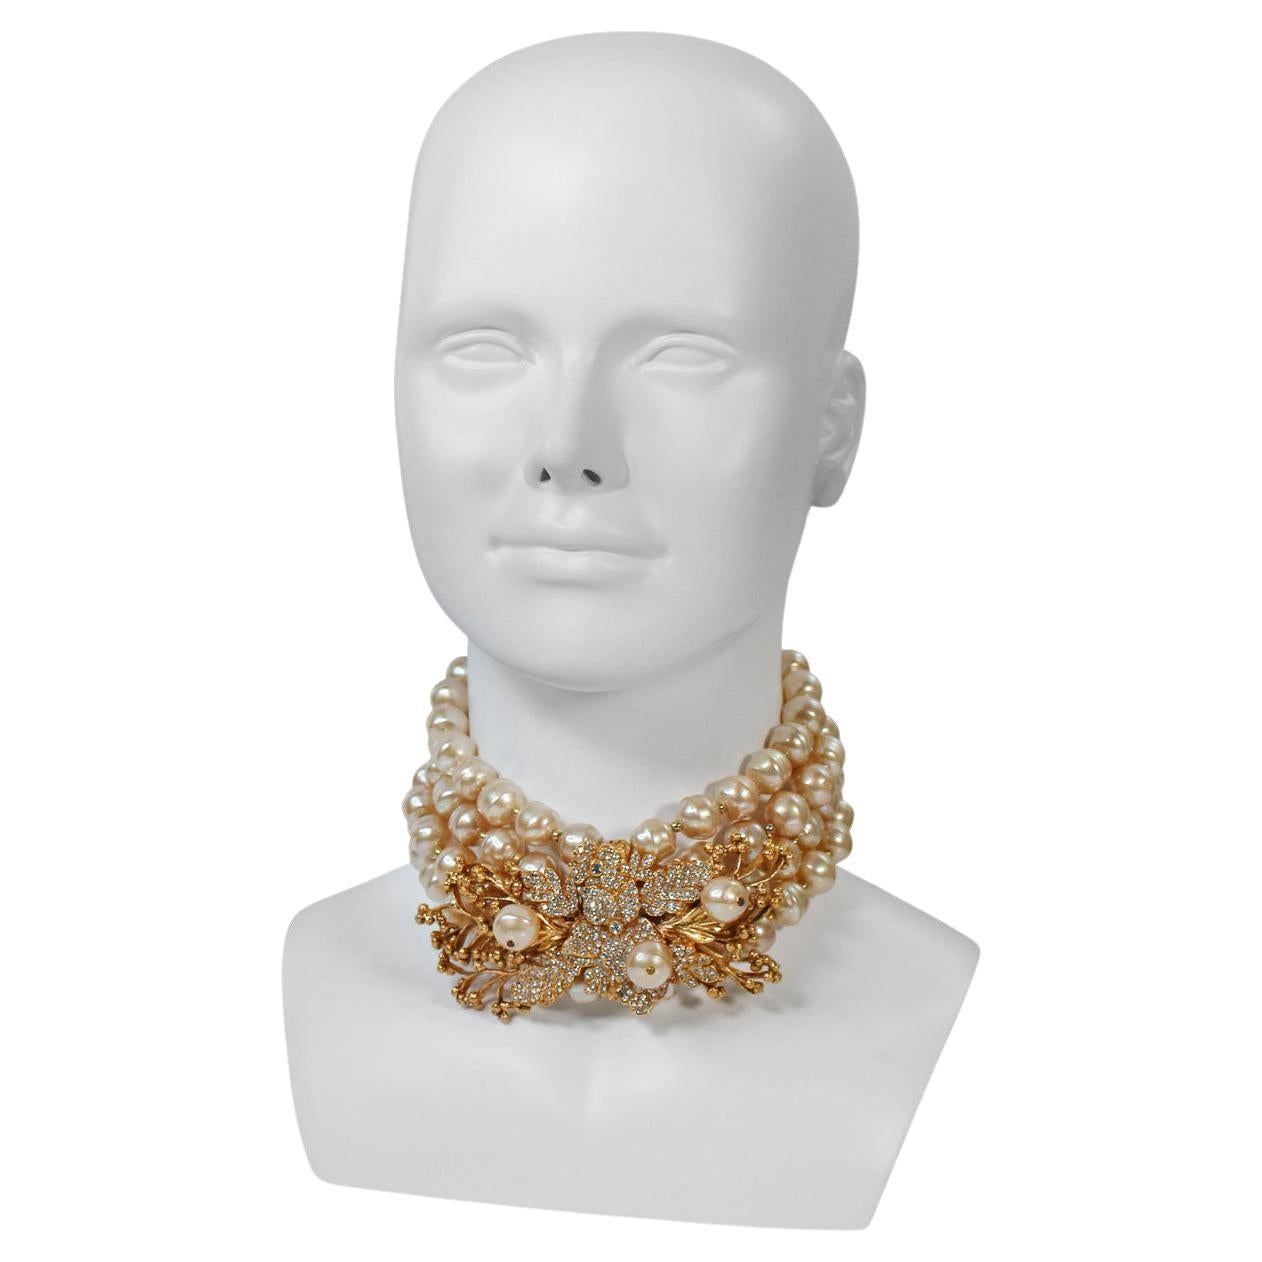 Vintage Christian Dior Couture Gold Tone with Rhinestone and Pearl Choker with Large Medallion Like Piece on Front in Middle on Top of four rows of Pearls. Il y a deux rangs de chaîne à fermer au dos, mais il est possible que deux rangs de chaîne